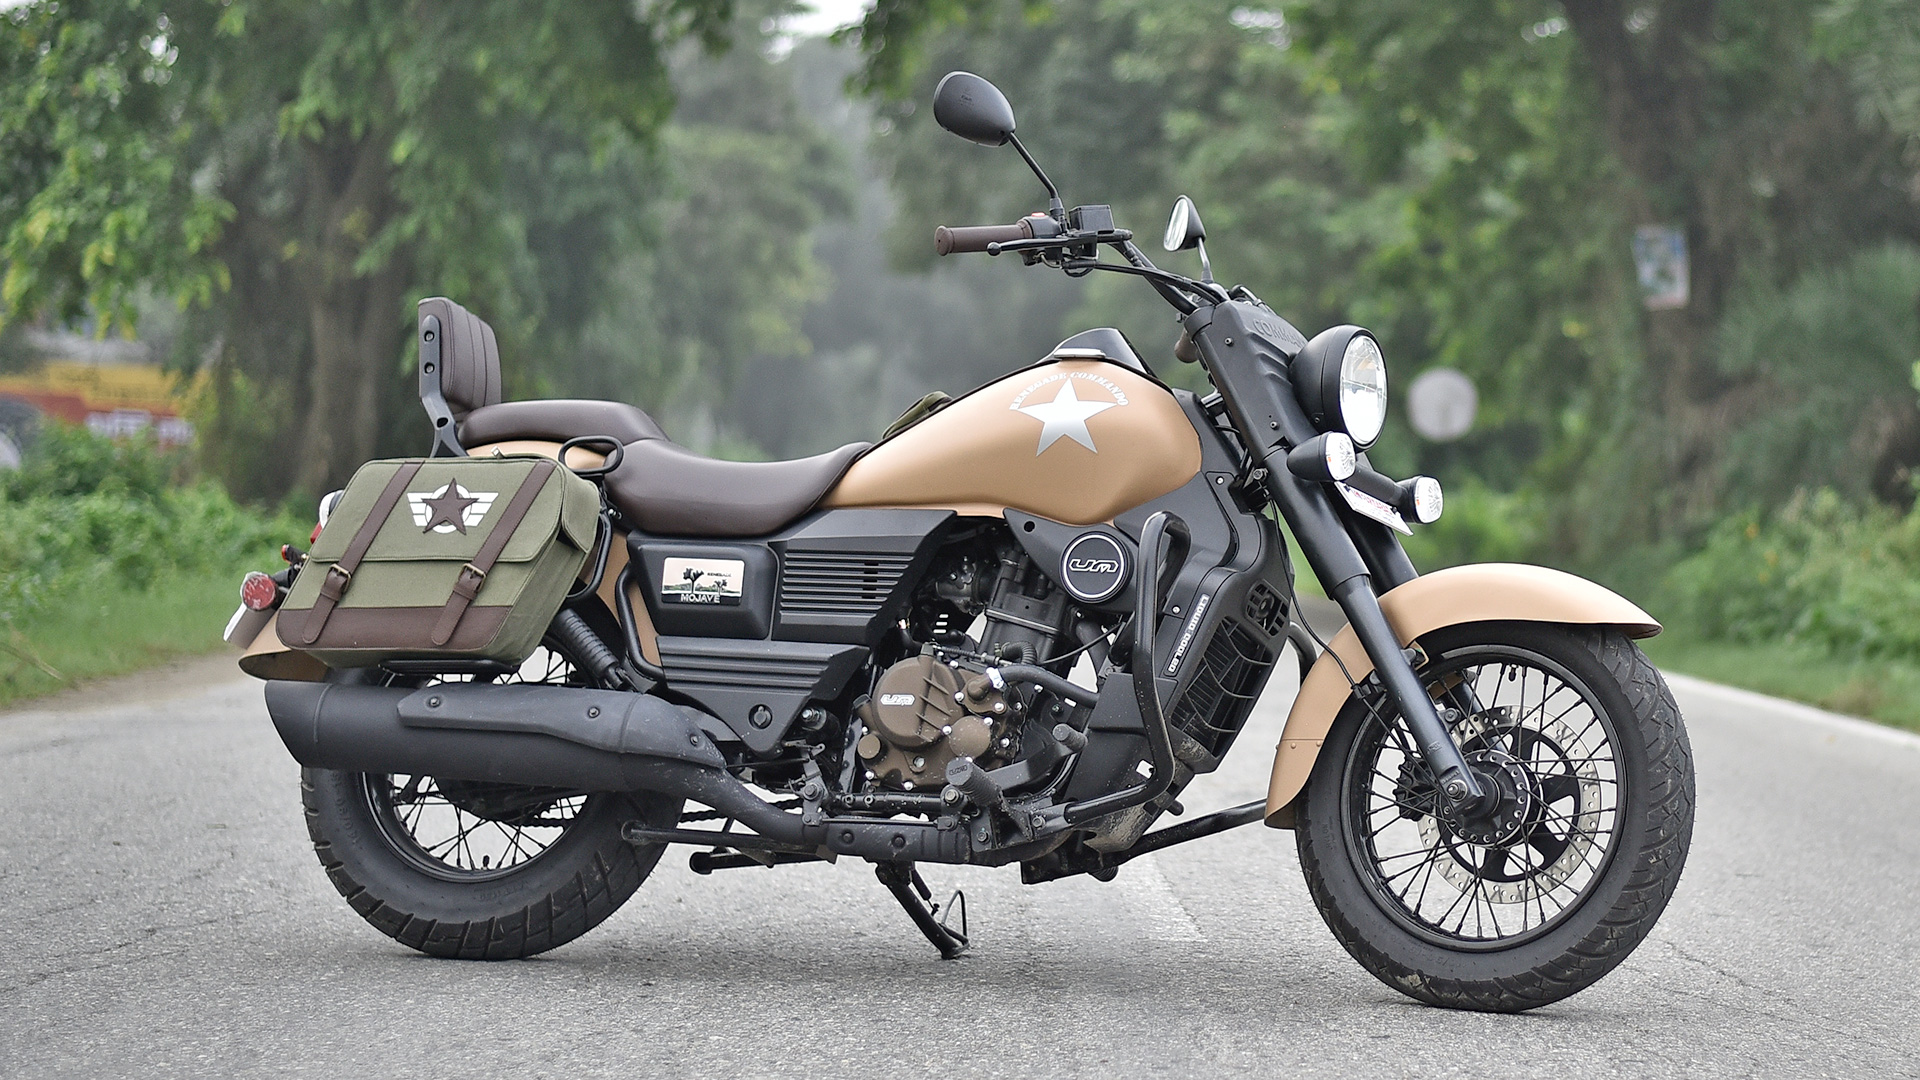 UM Motorcycles Renegade 2018 - Price in India, Mileage, Reviews, Colours,  Specification, Images - Overdrive